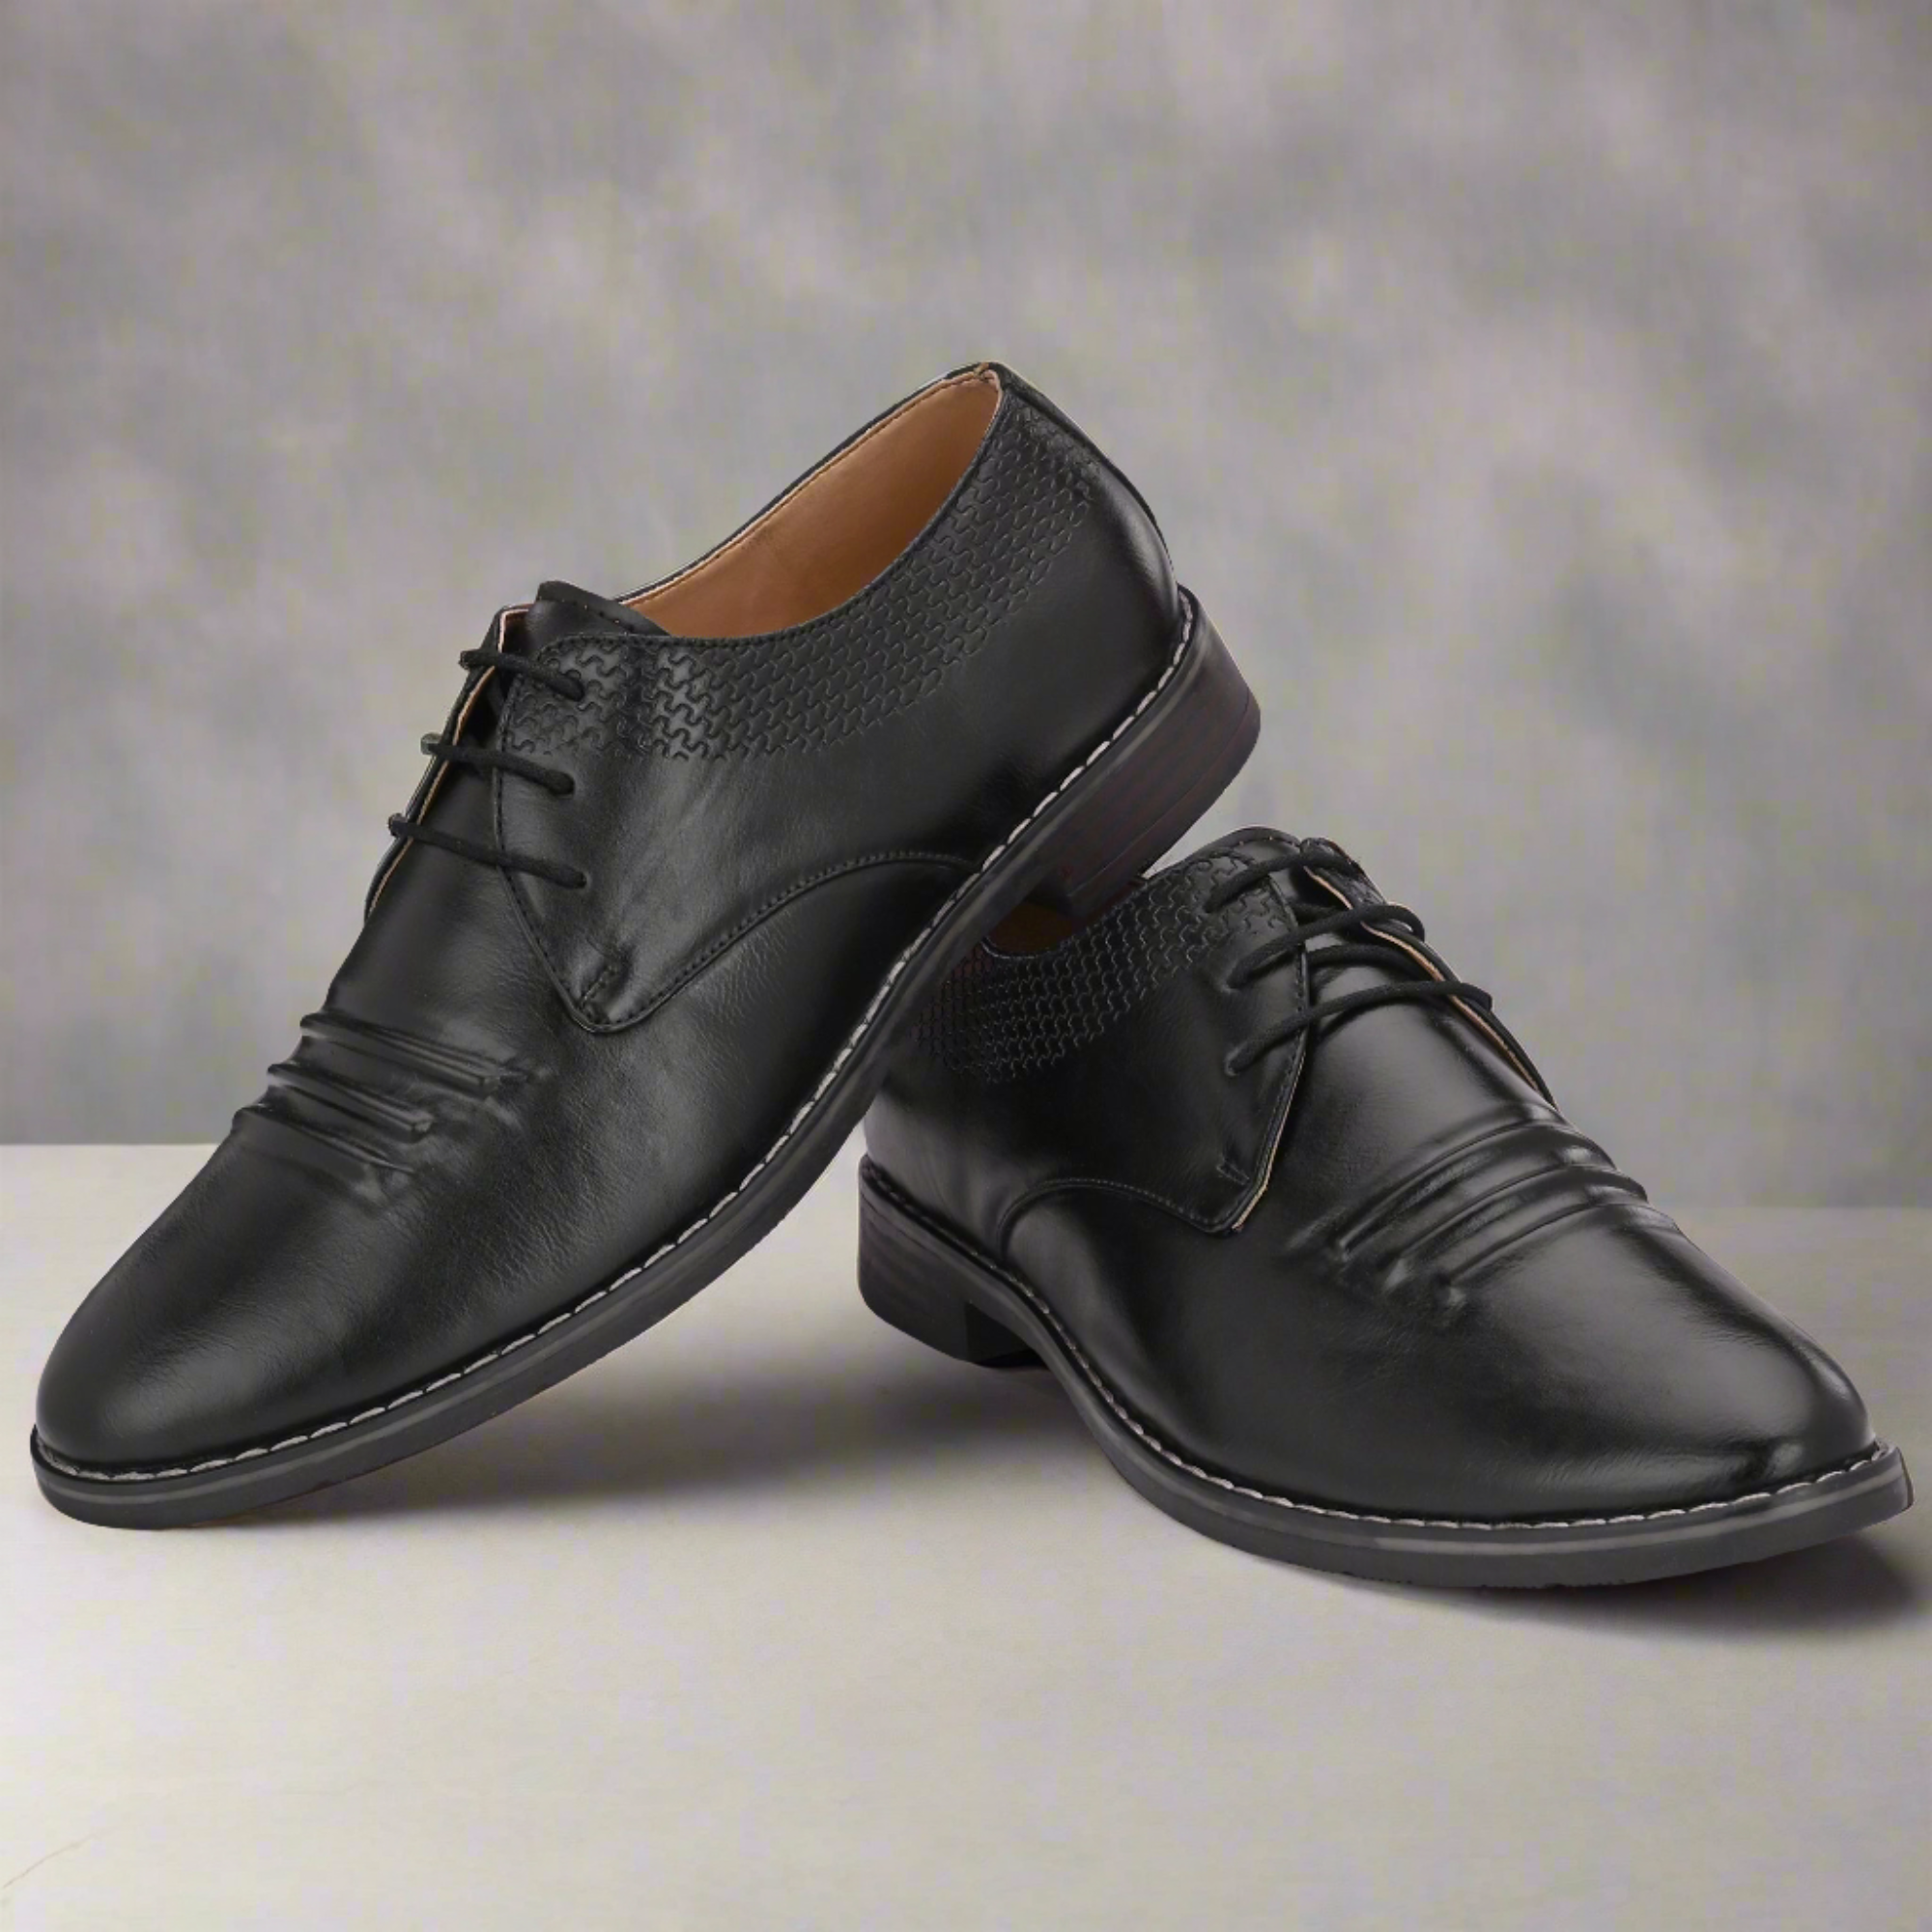 Attitudist Unisex Handcrafted Derby Black Formal Lace-up Shoes With Round Toe And Textured Vamp